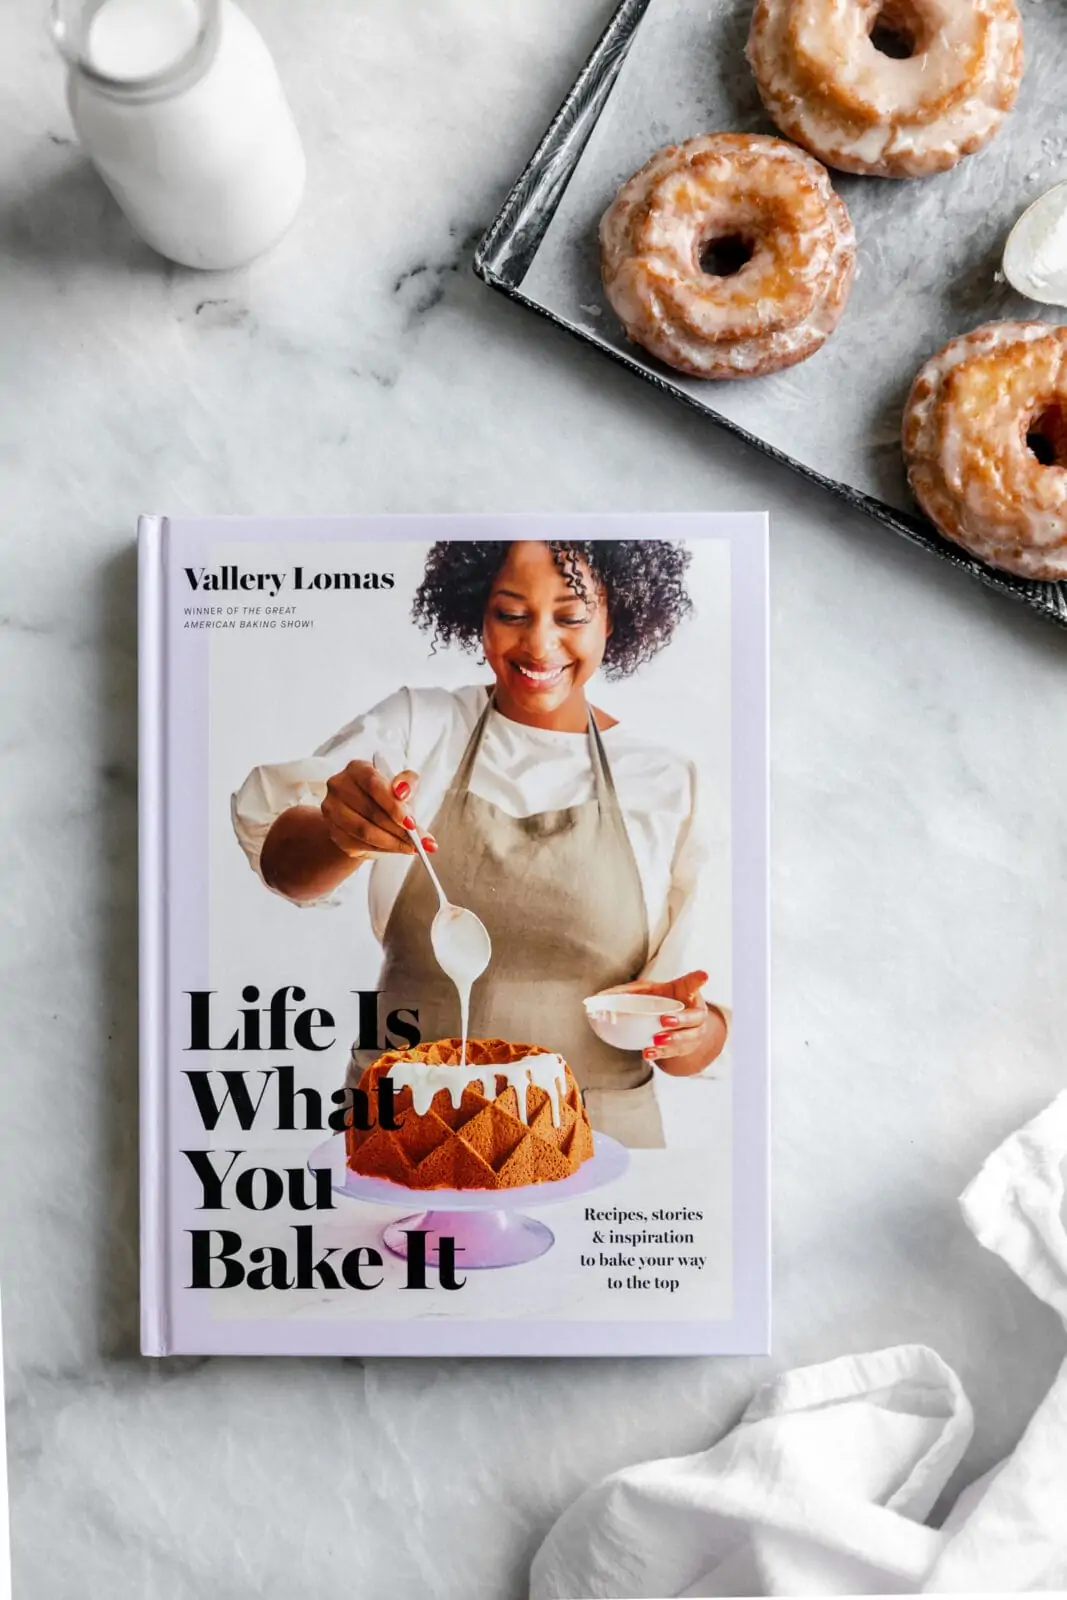 life is what you bake it